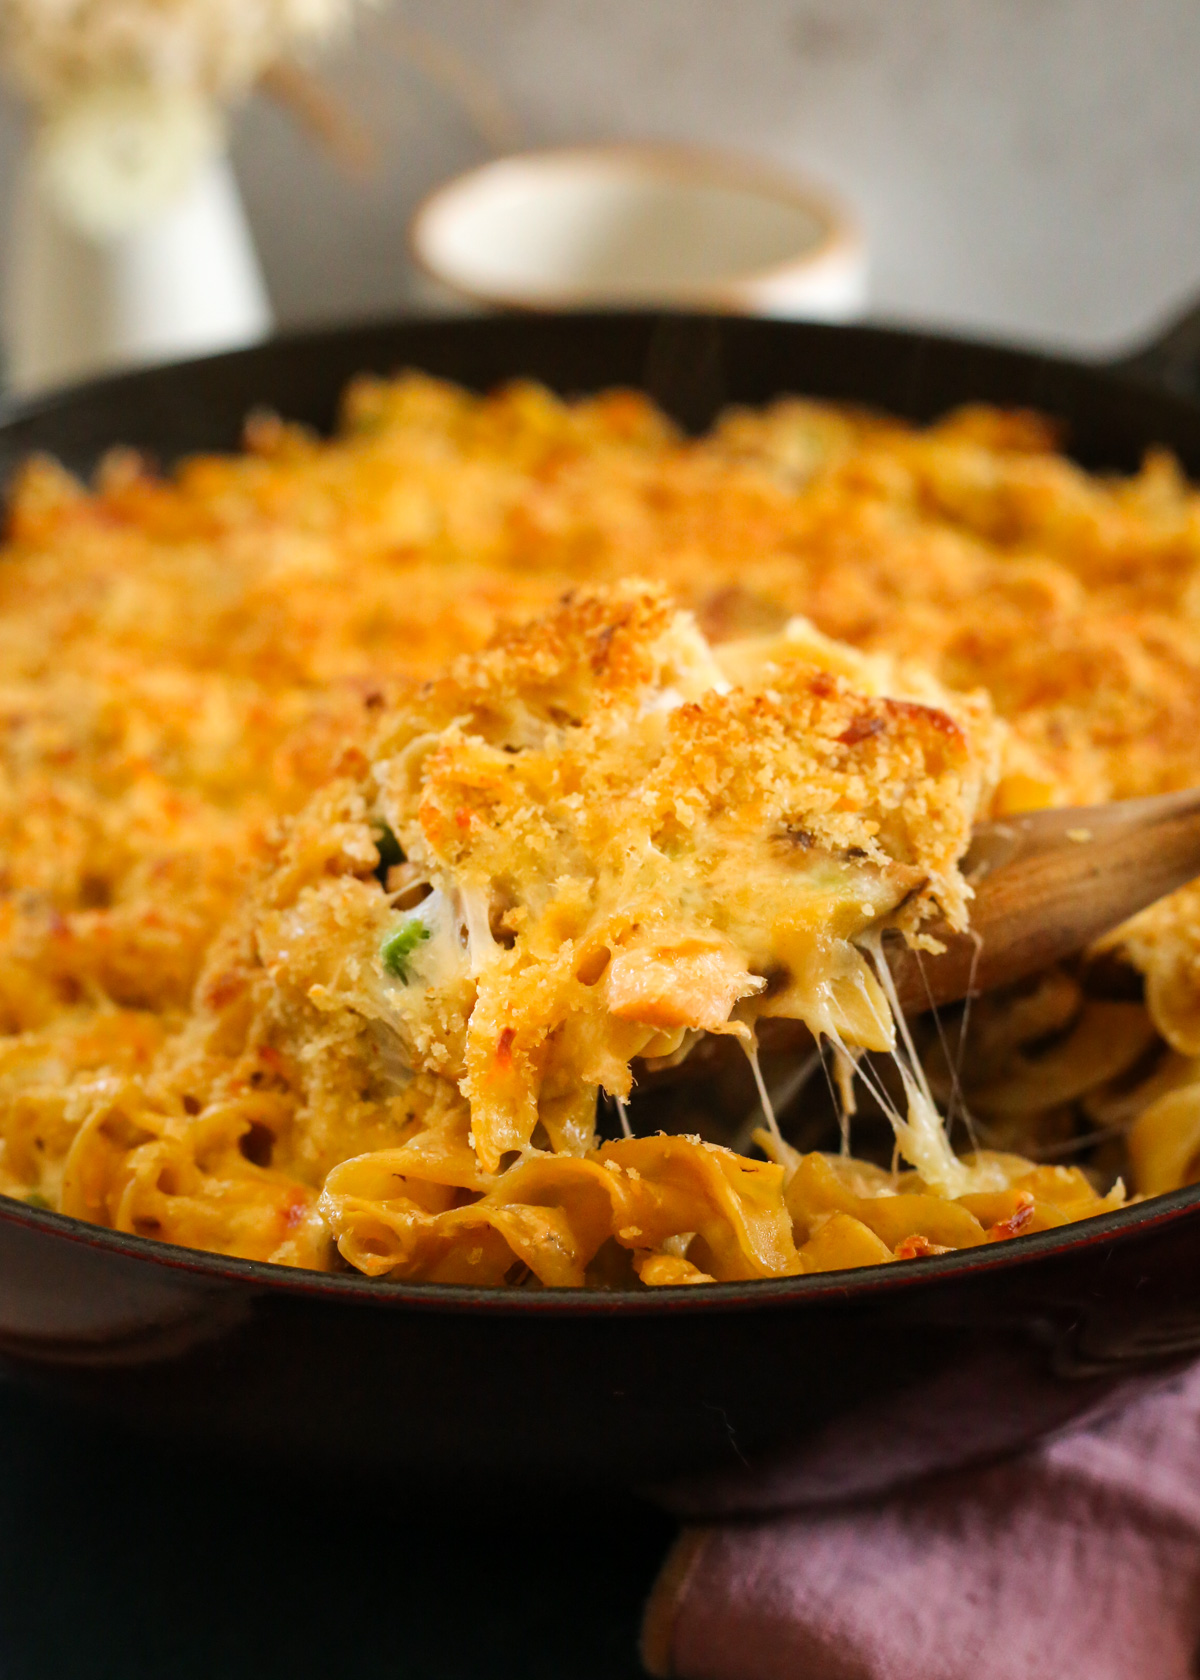 A wooden serving spoon lifts a heaping scoop of cheese tuna casserole from a dark red braising dish. The melted cheese stretches between the noodles and the crispy bread crump topping is golden brown